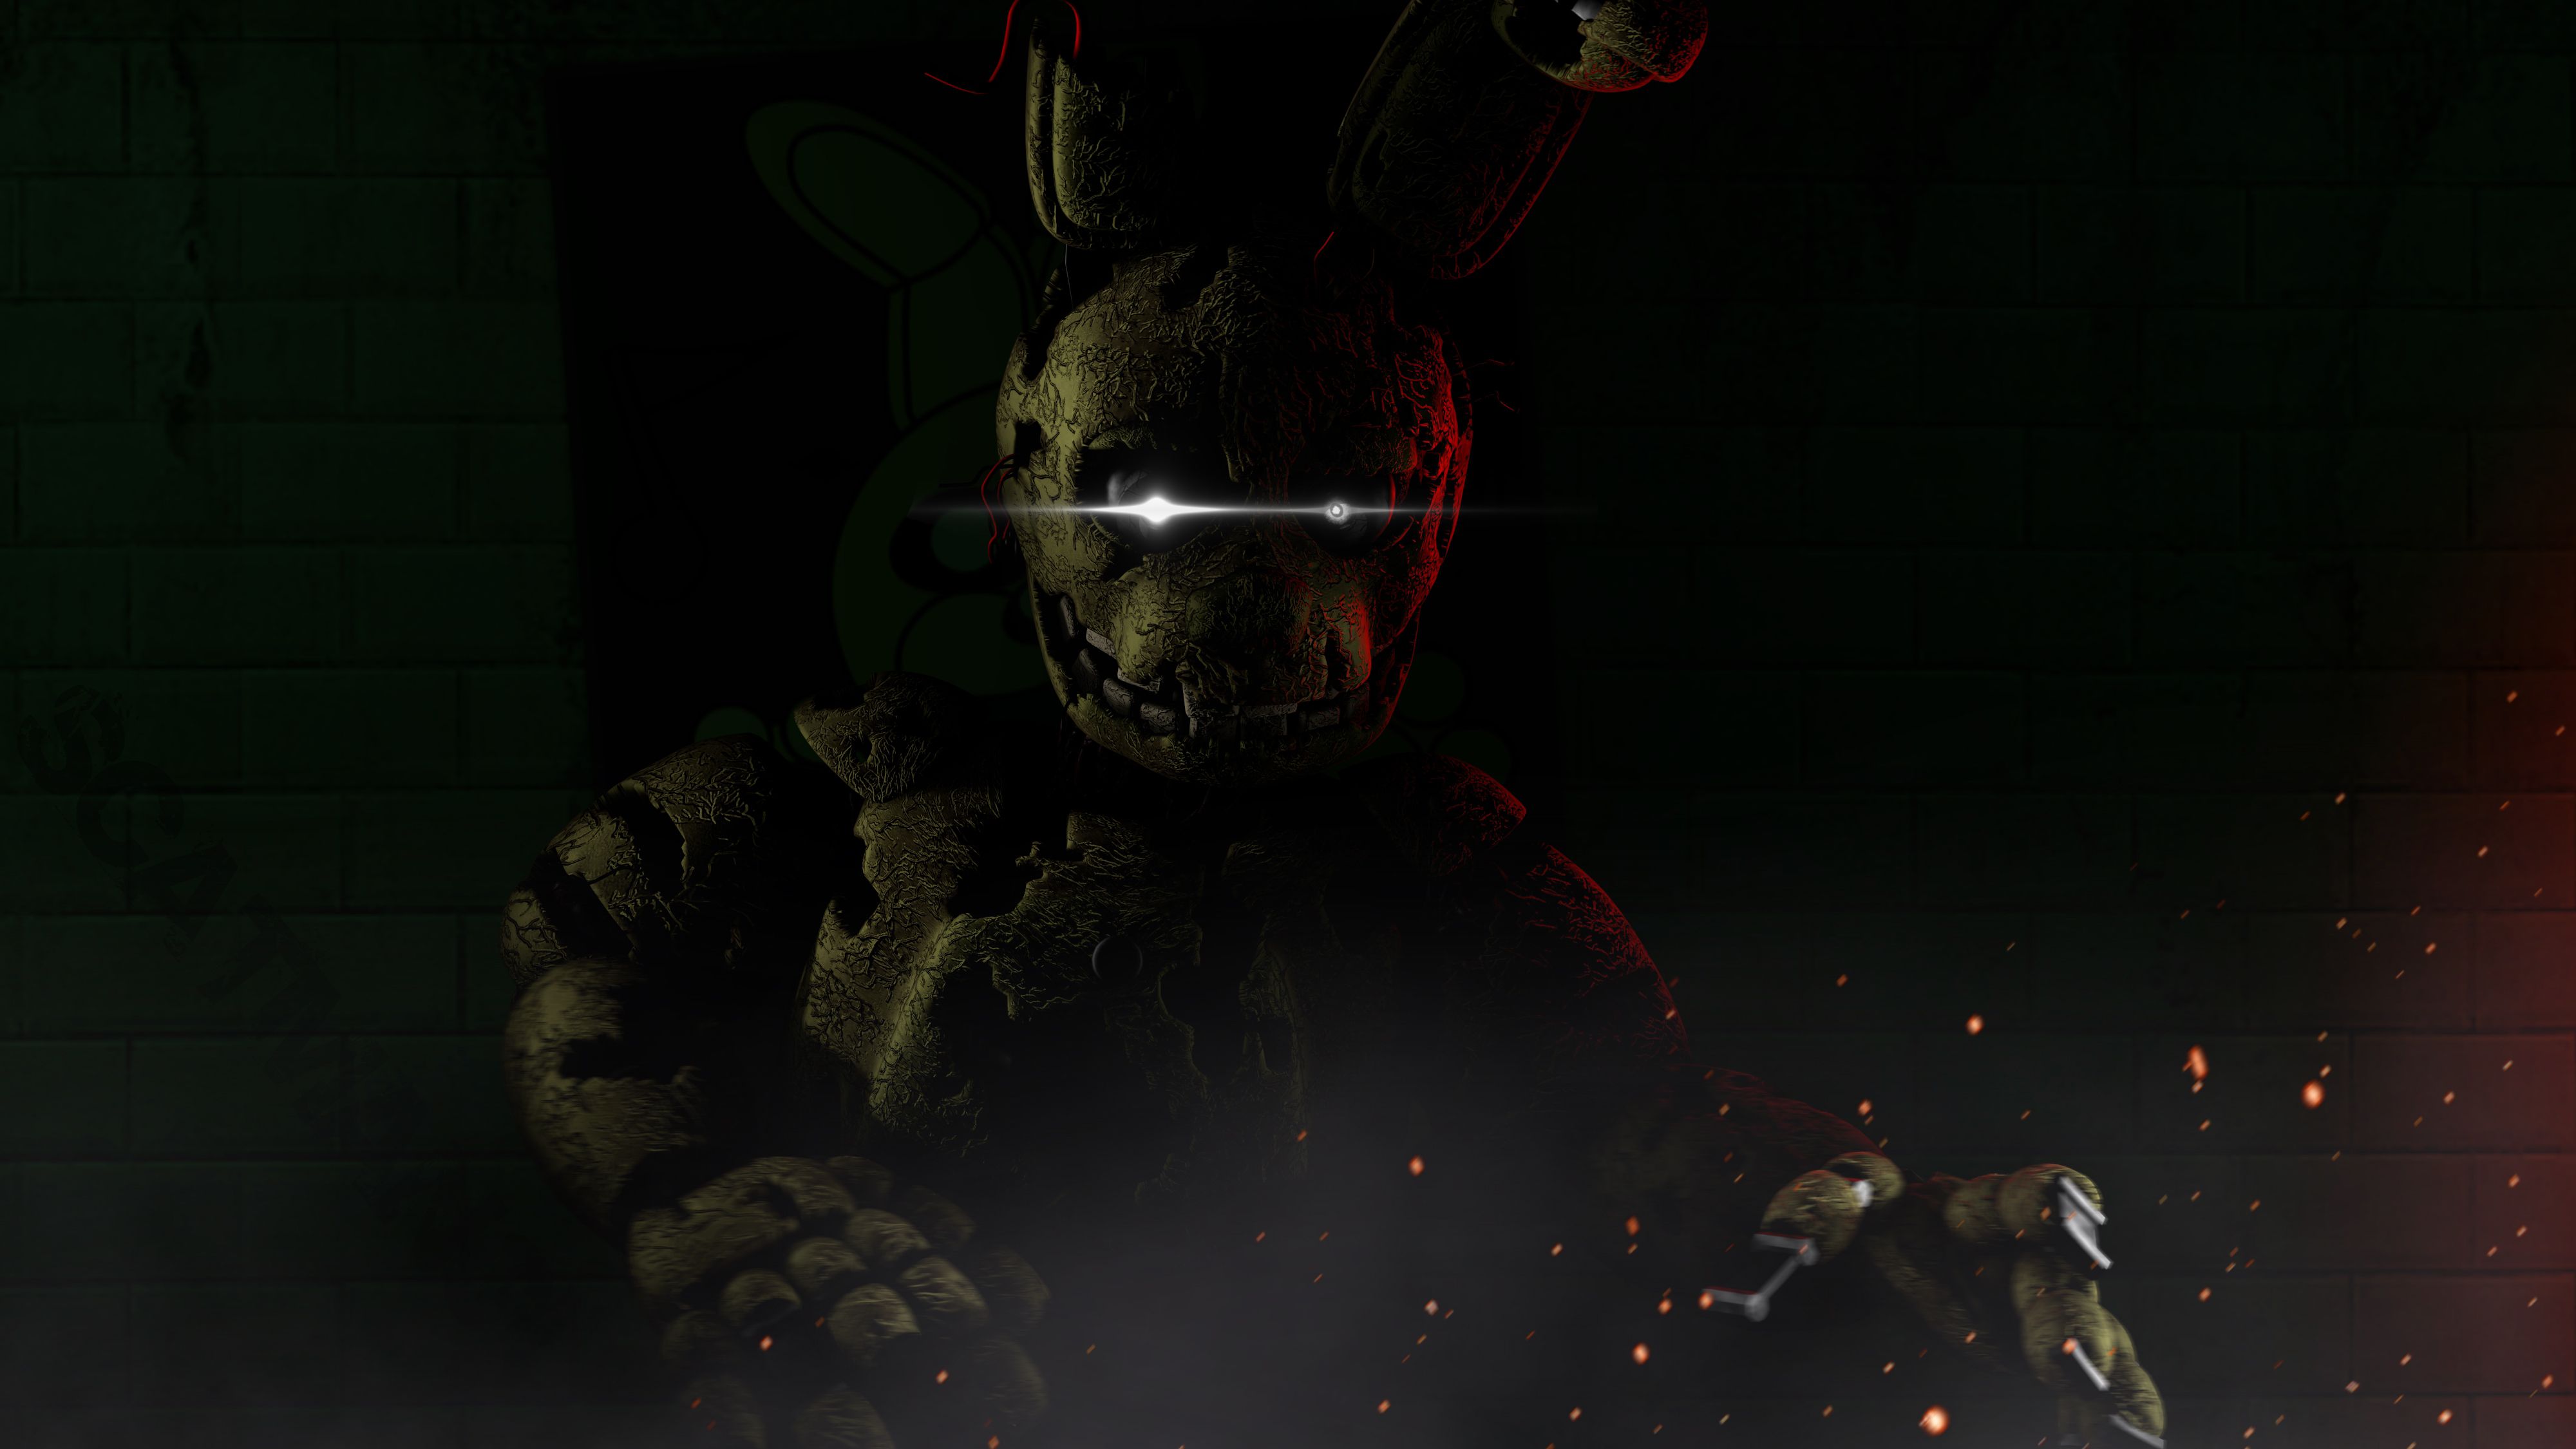 Five Nights at Freddy's 3 4k Ultra HD Wallpaper. Background Image